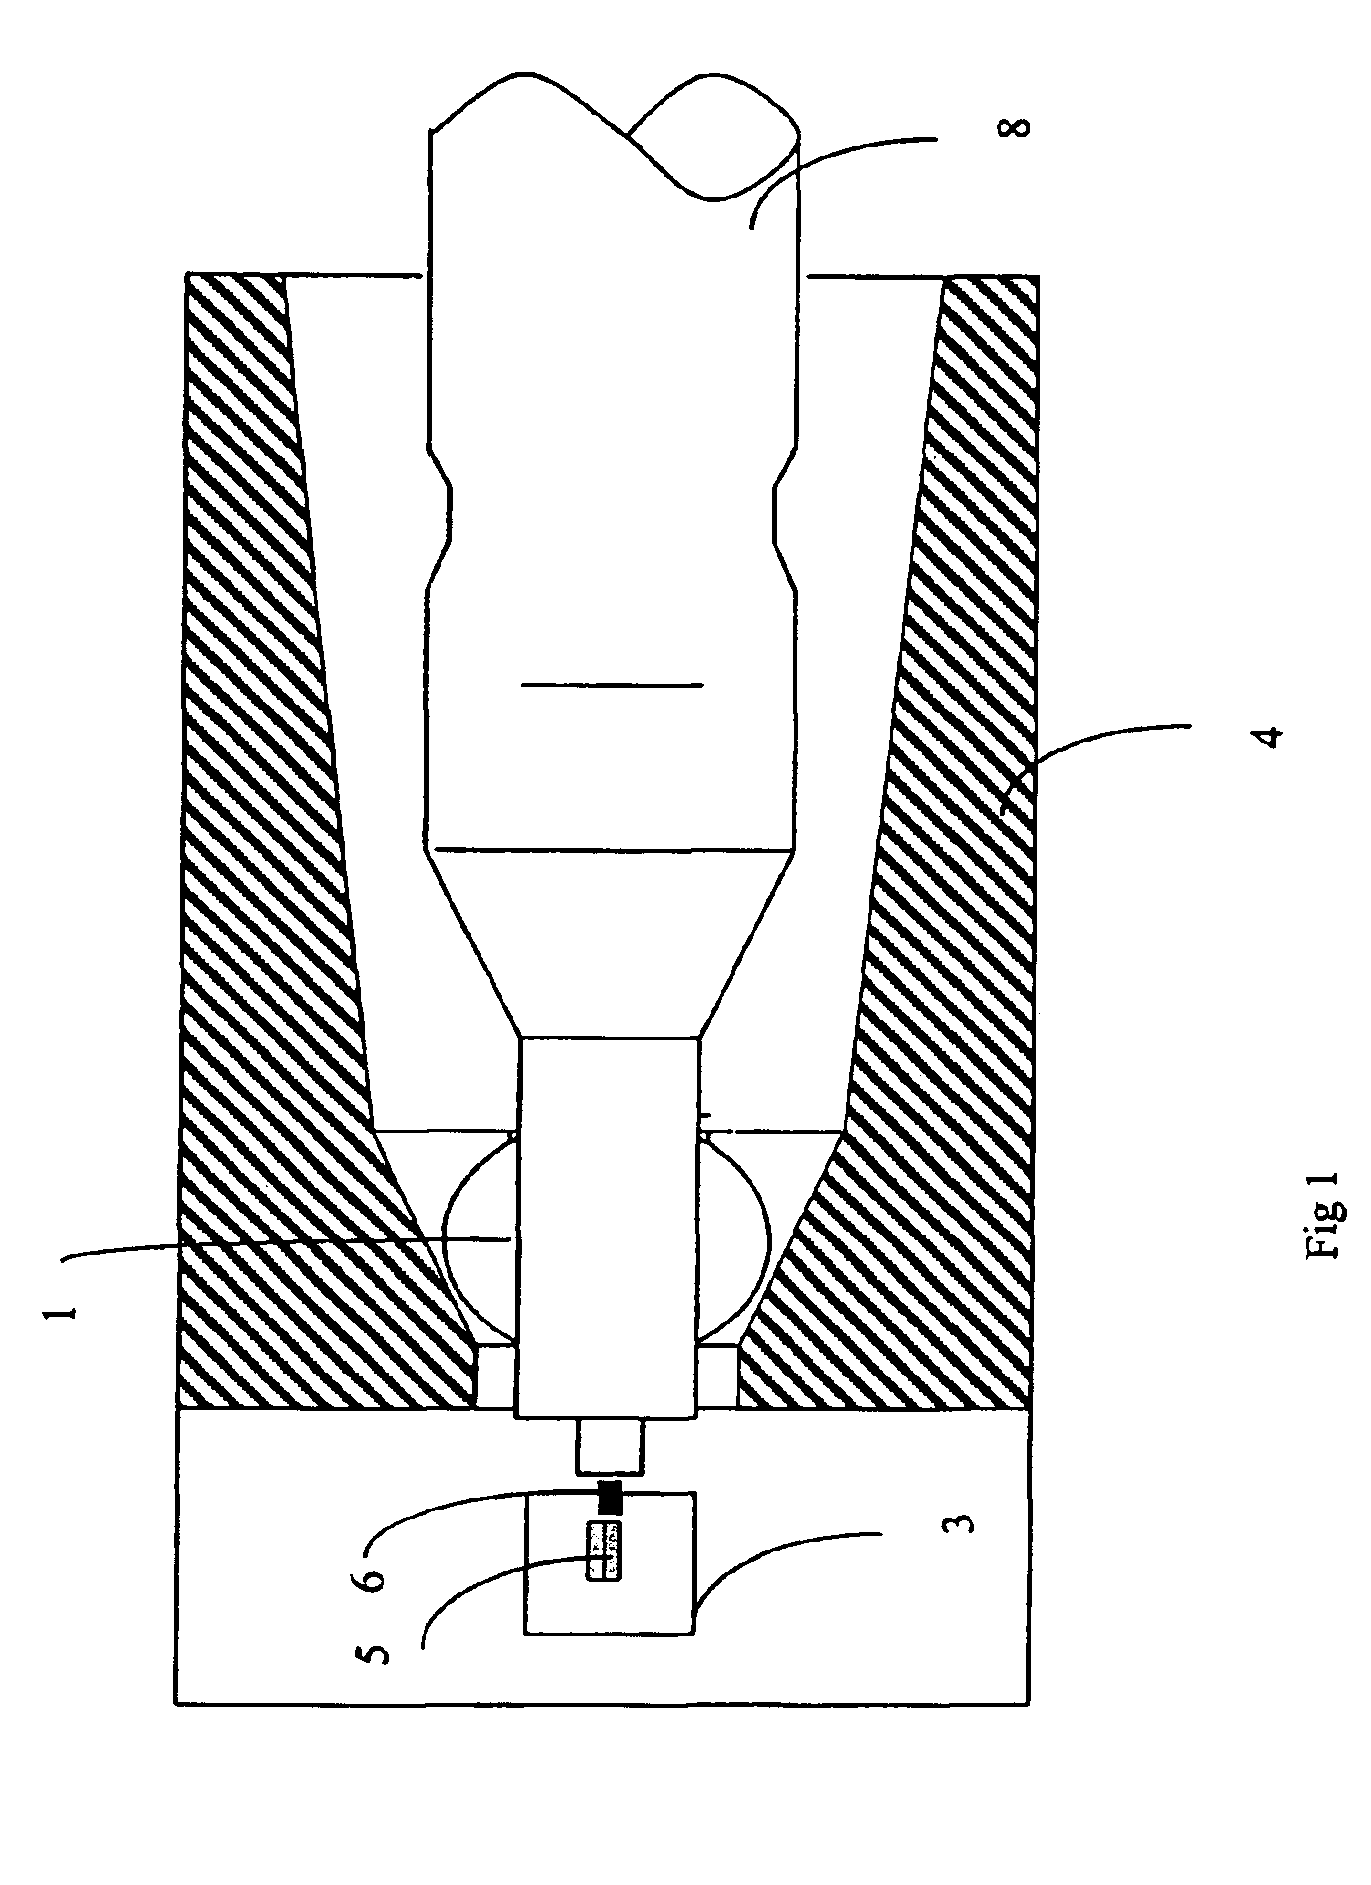 Optical fiber alignment device and method